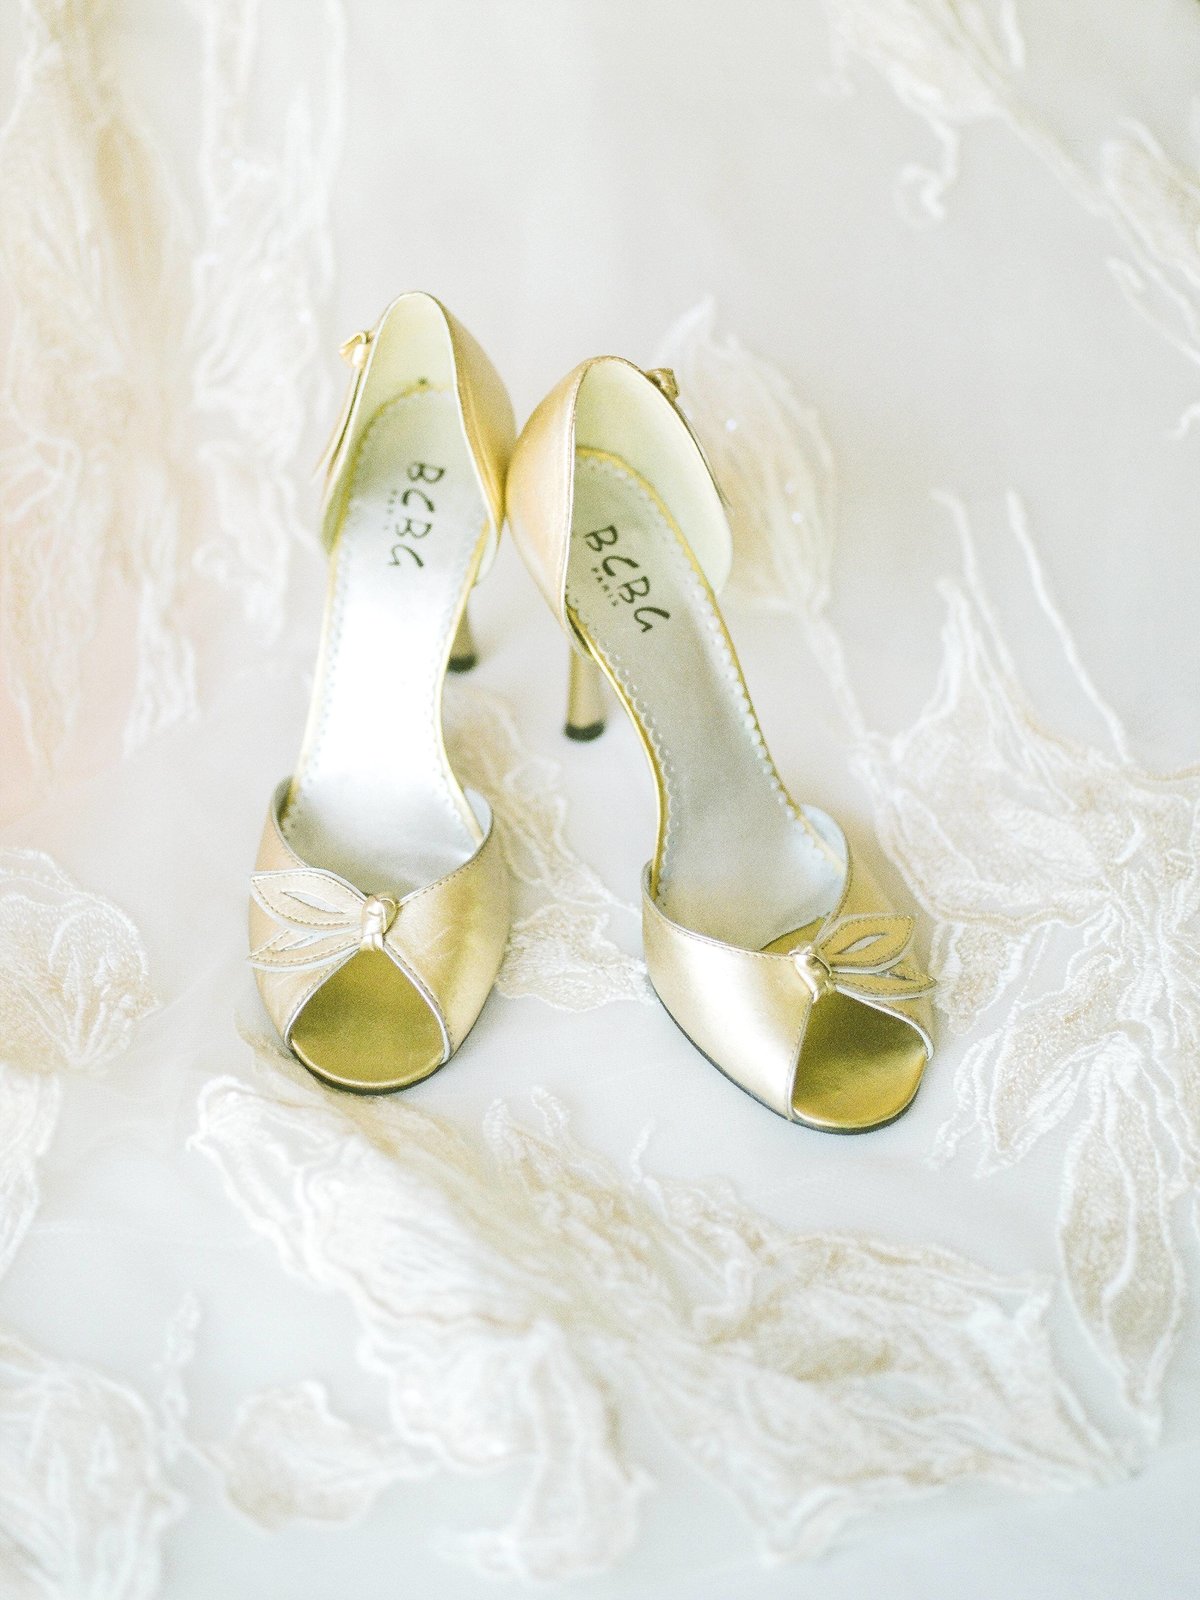 Bridal Shoes Getting Ready